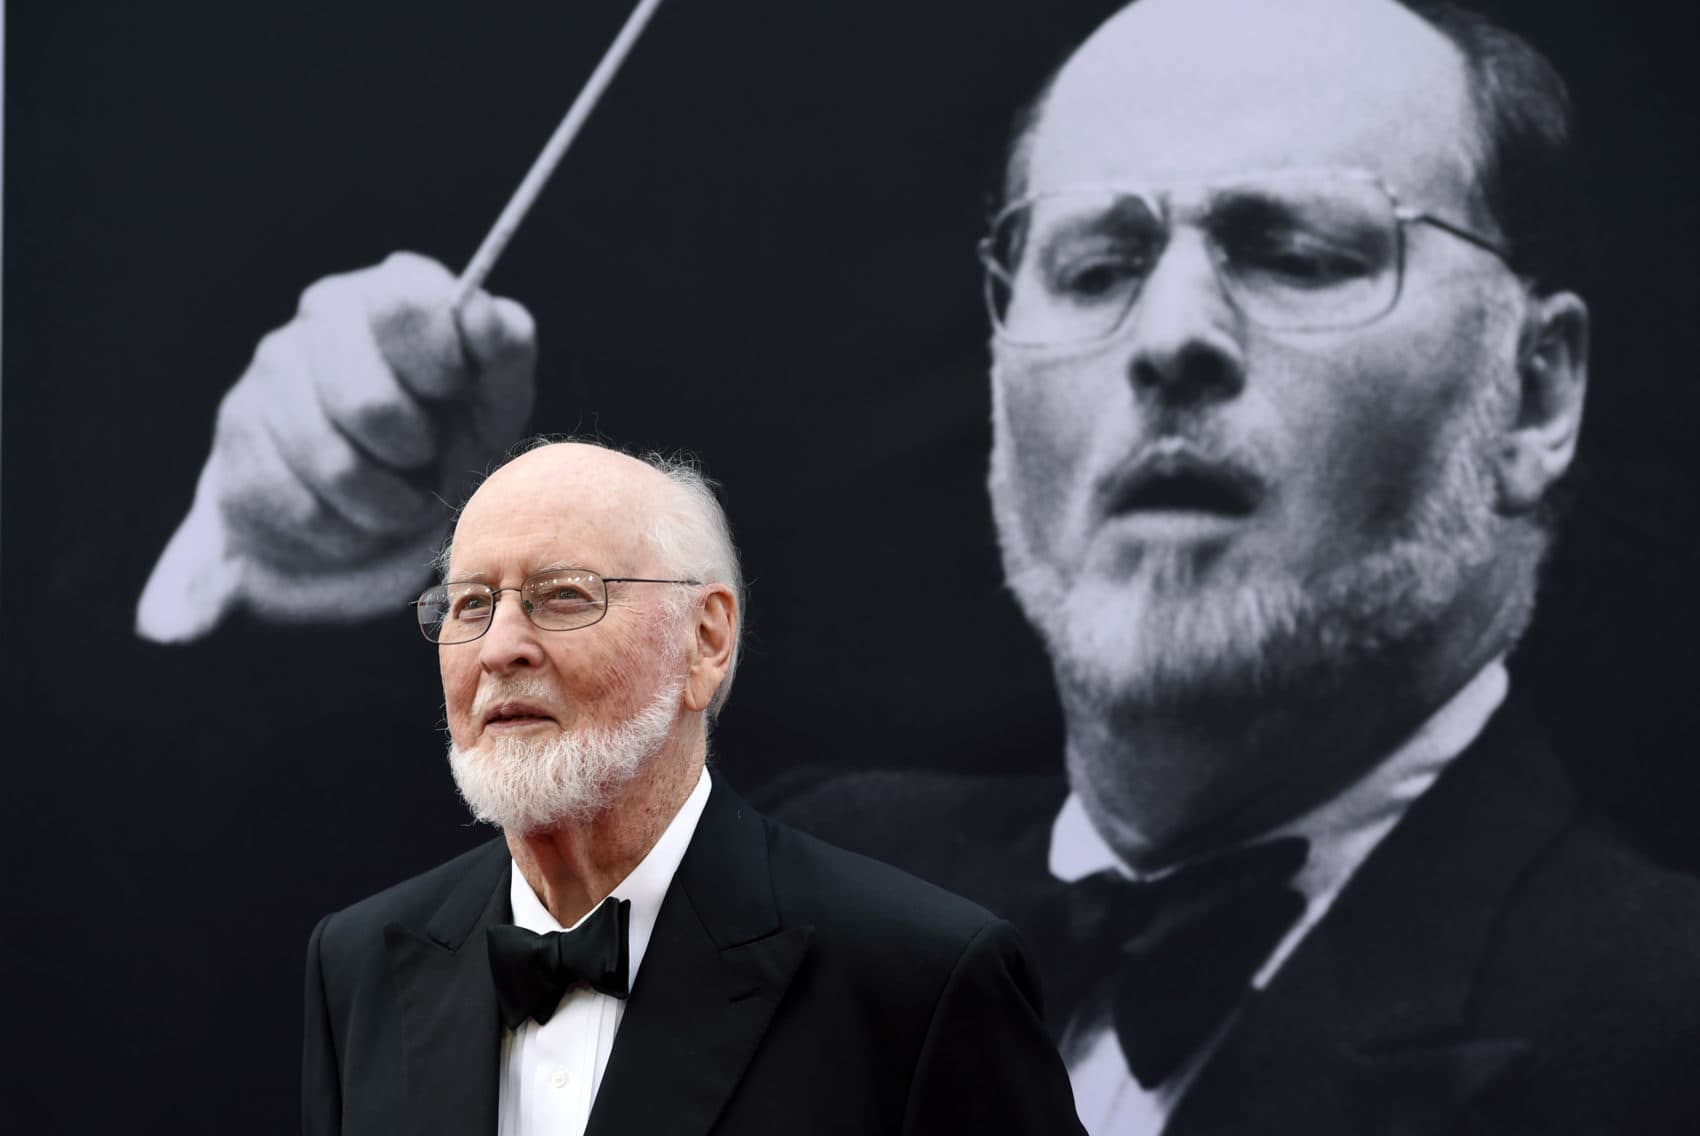 John Williams in 2016. (Photo by Chris Pizzello/Invision/AP, File)